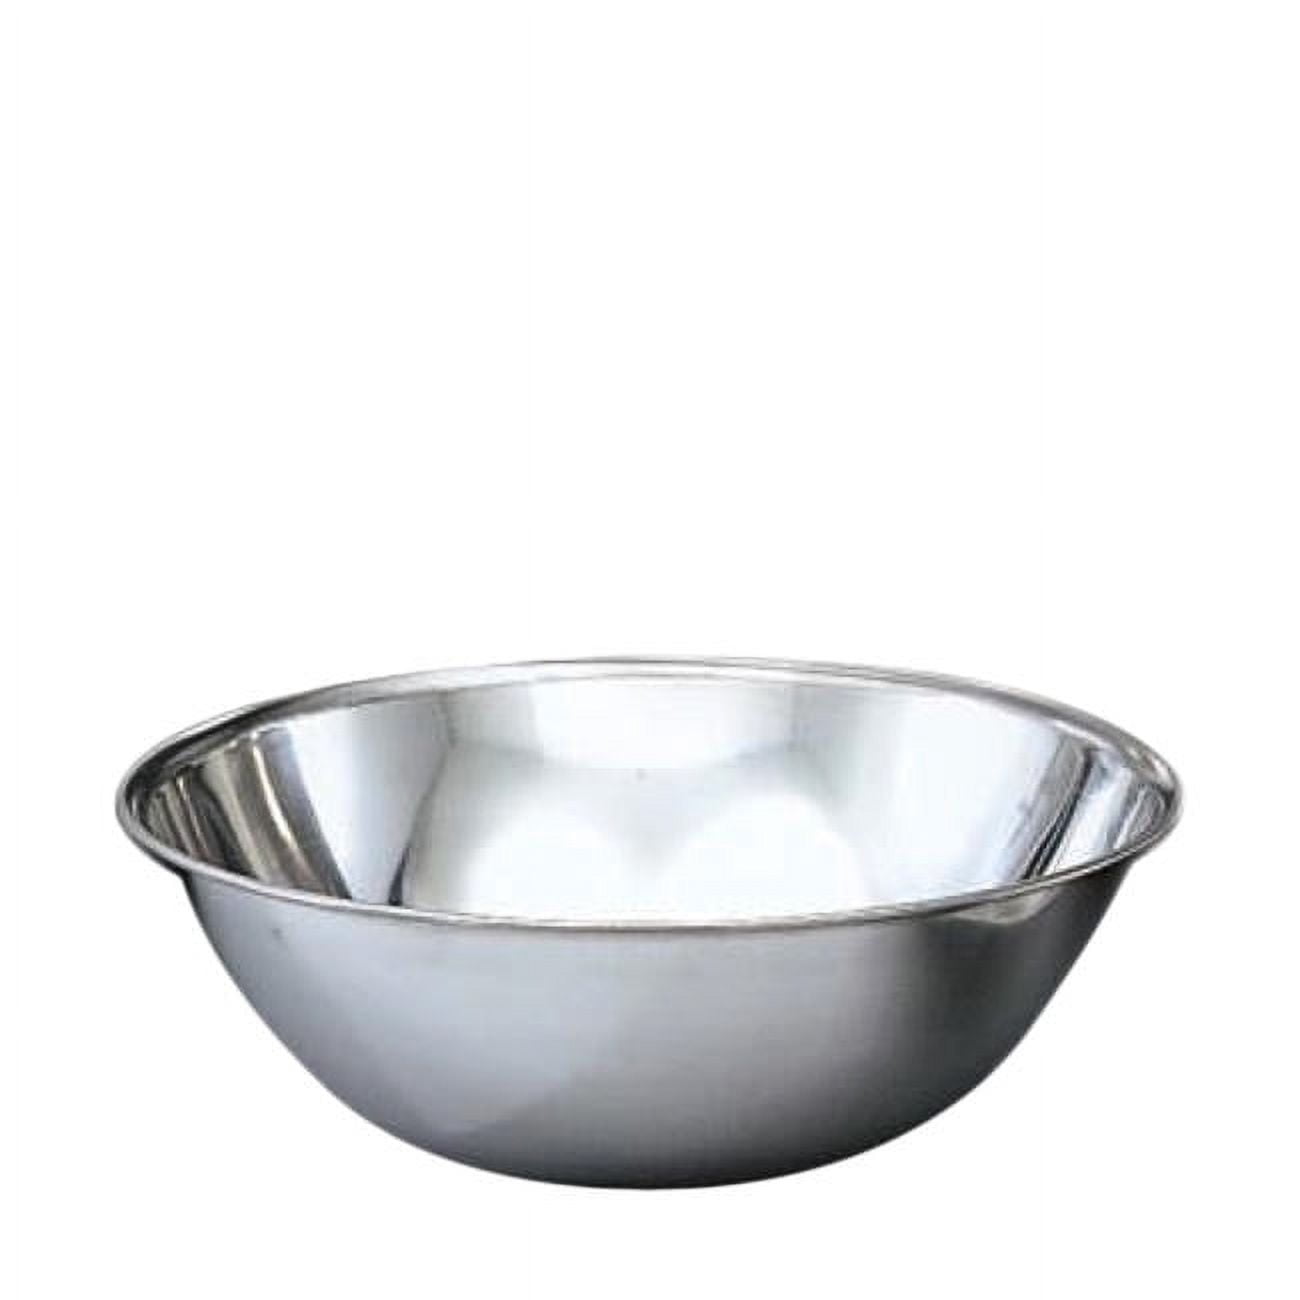 16 Quart Stainless Steel Mixing Bowl, Polished Mirror Finish Nesting Flat Base Bowl, Professional Cookware Mixing and Prep Bowl